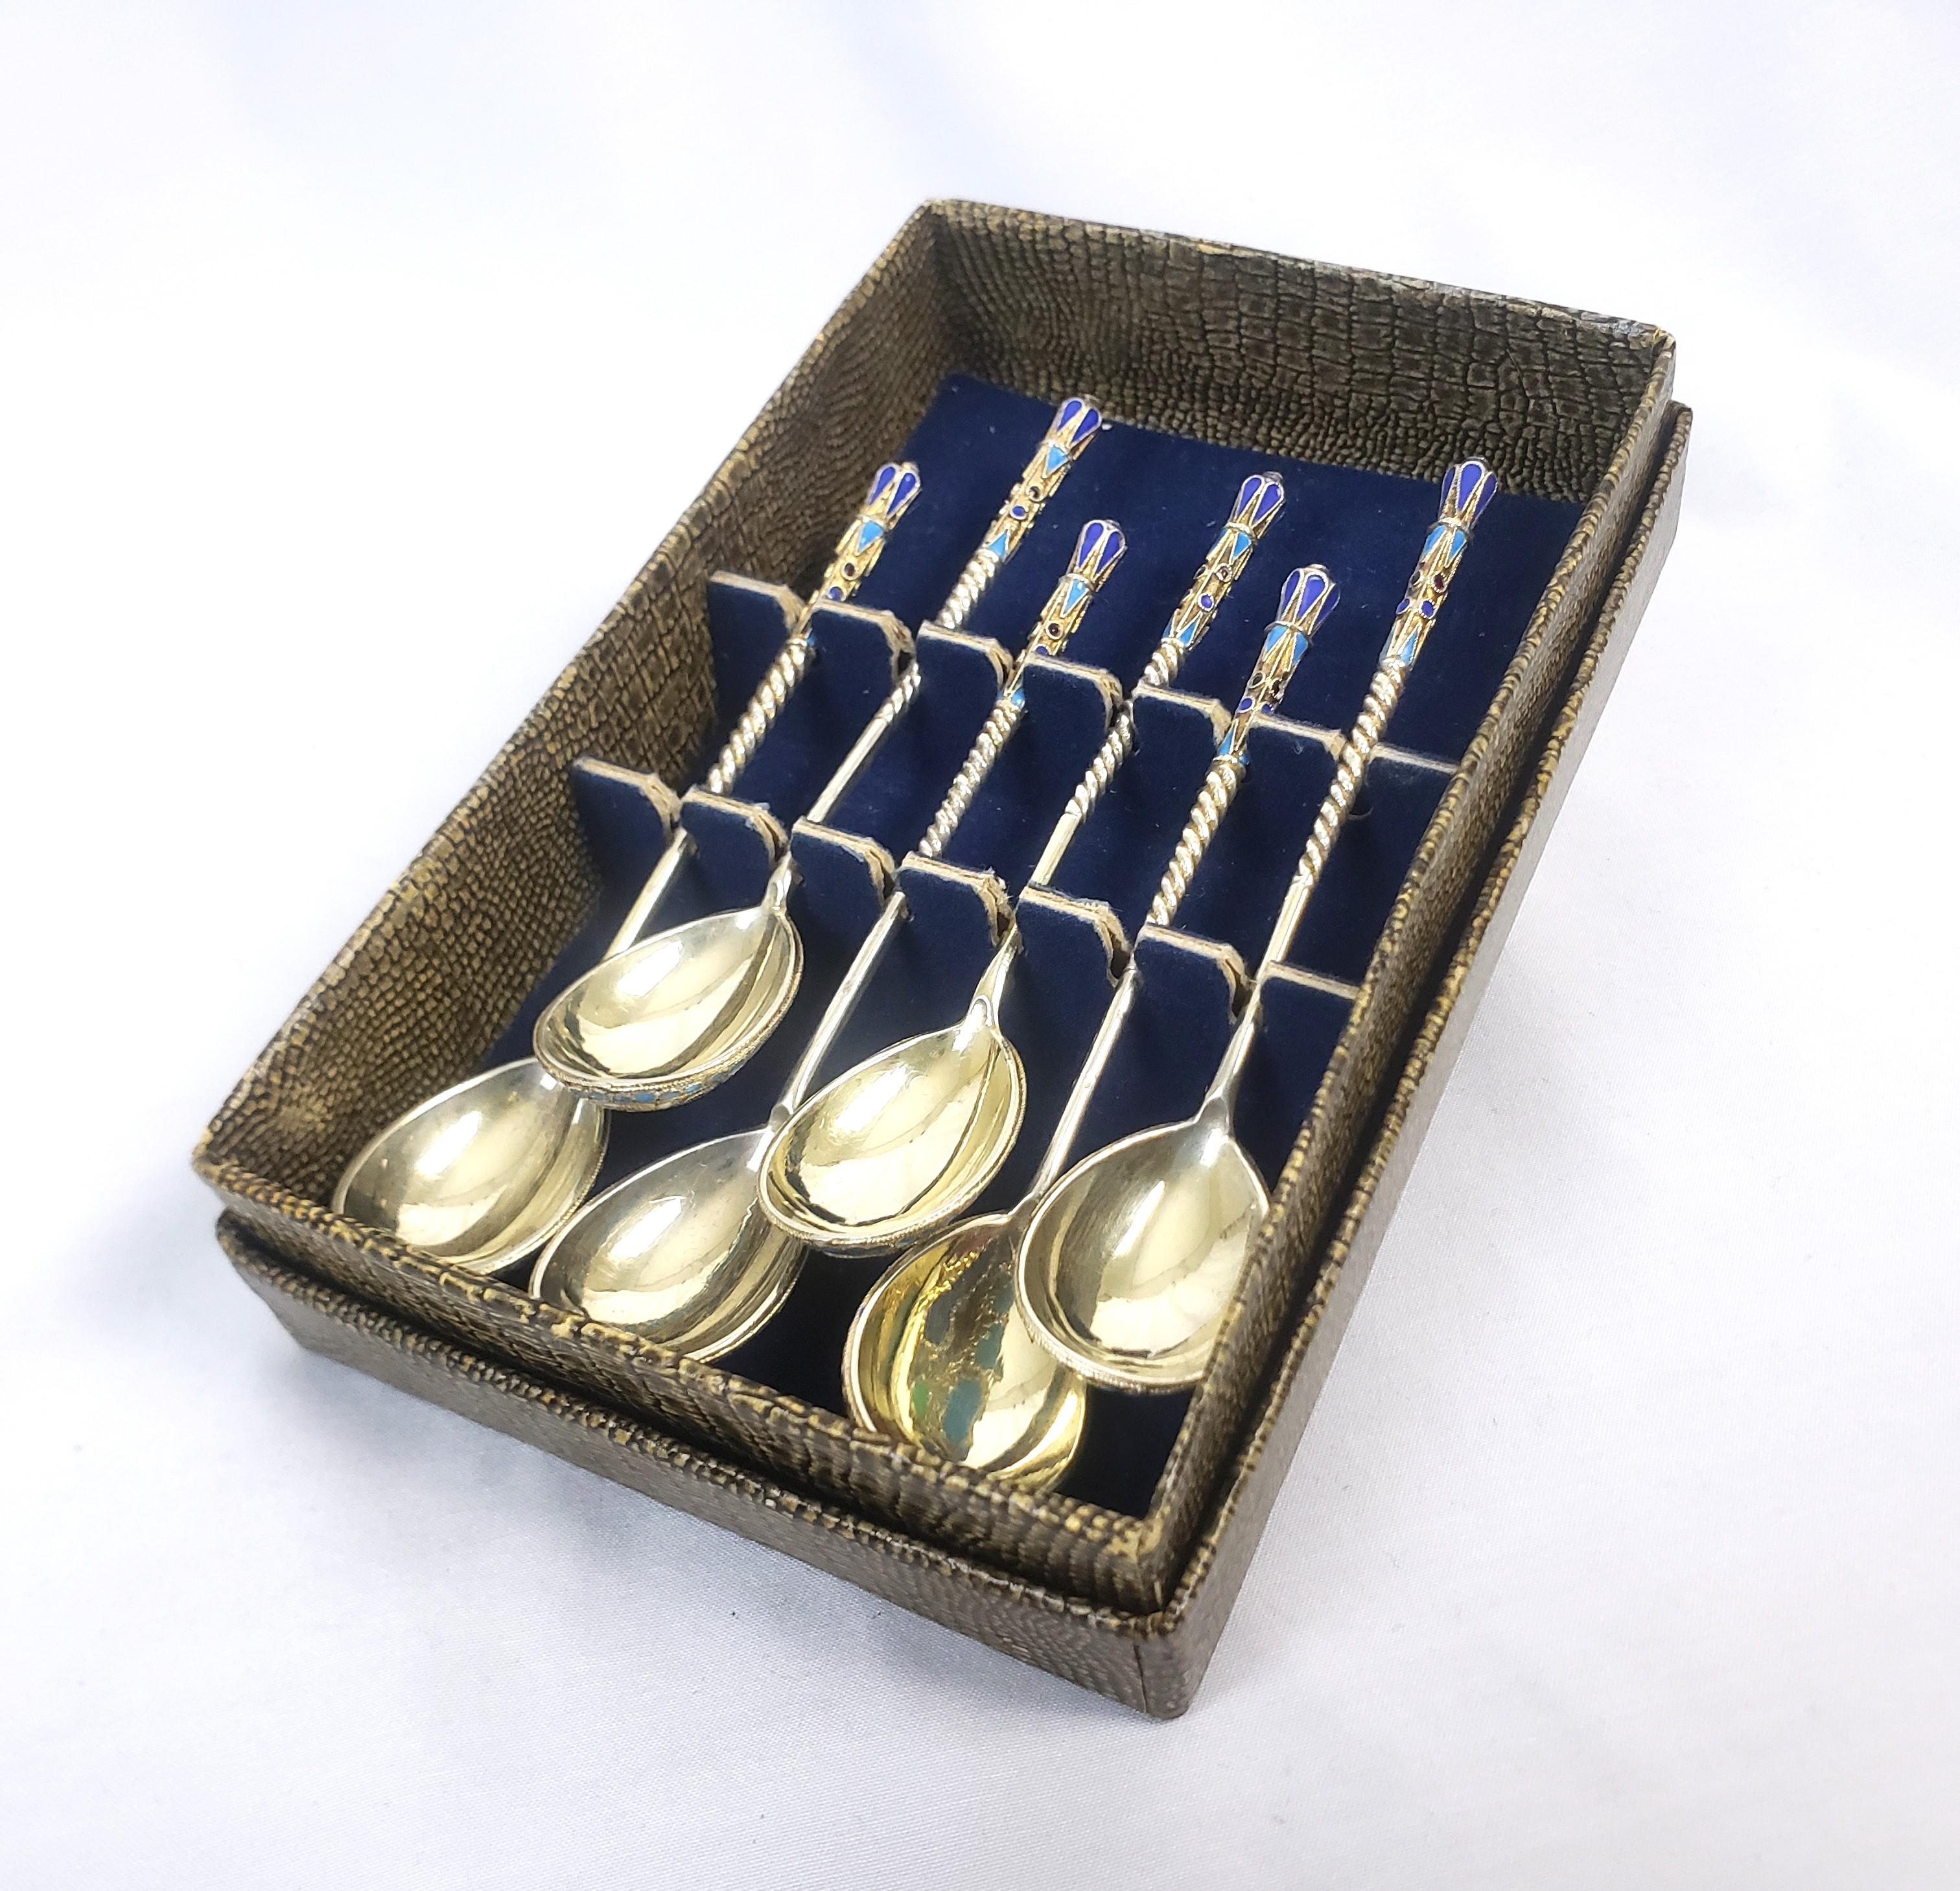 High Victorian Antique Russian Silver & Enamel Spoon Set with Ornate Floral Motif For Sale